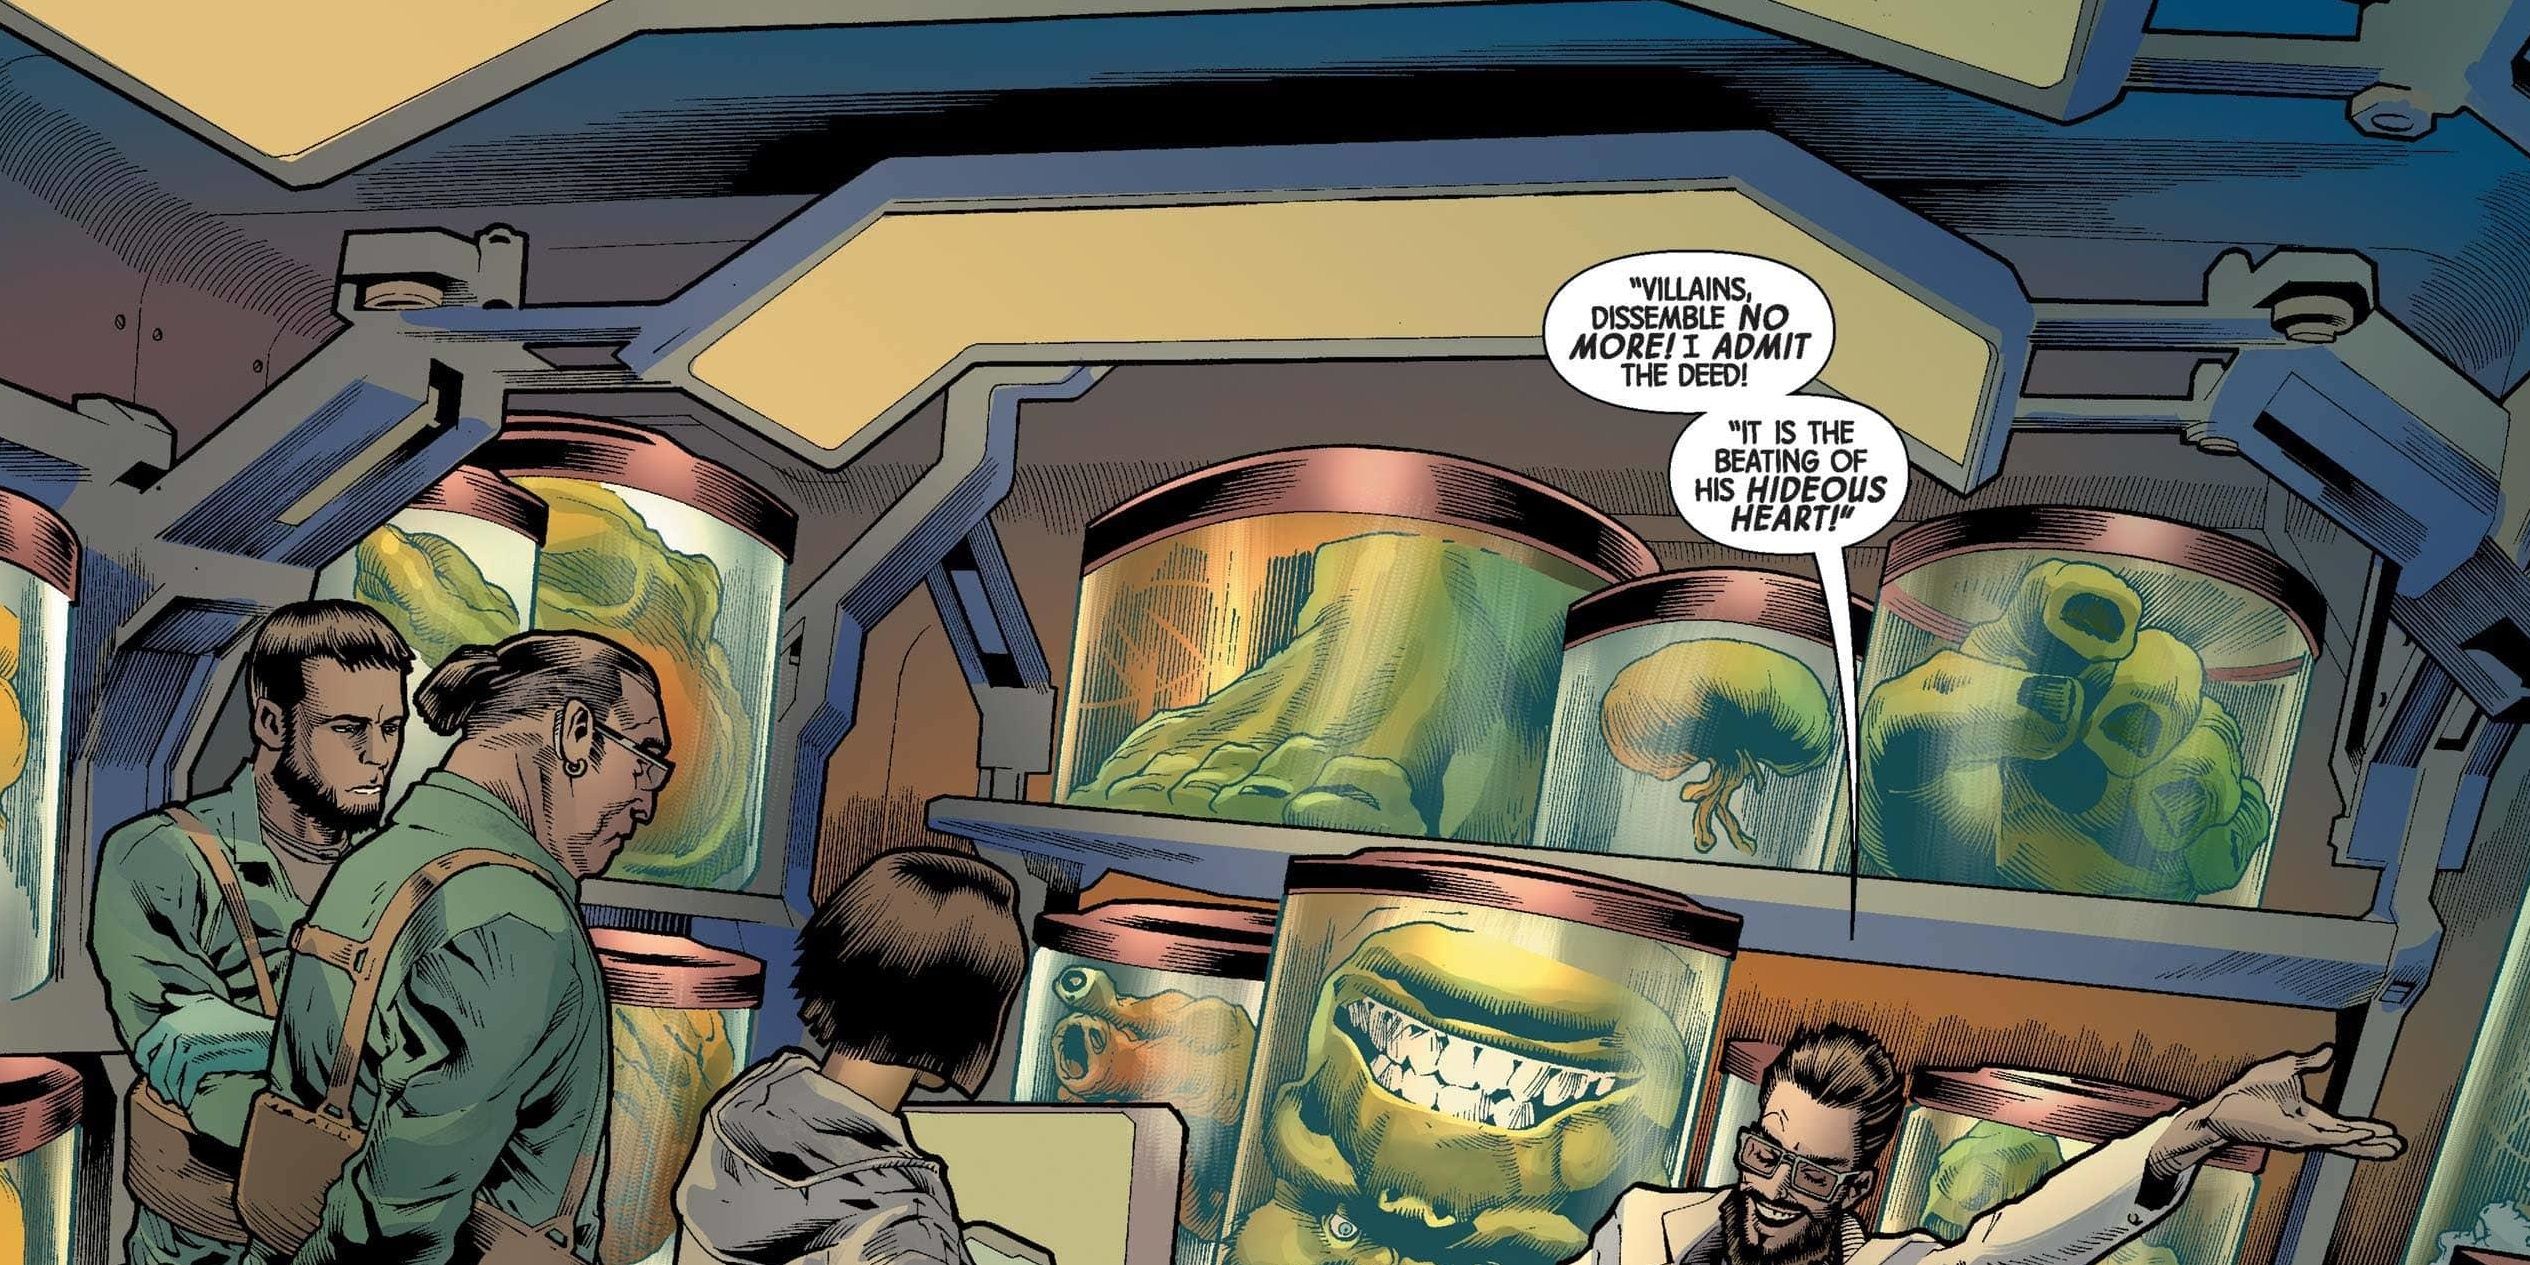 Clive With Body Parts Of Hulk In Jars